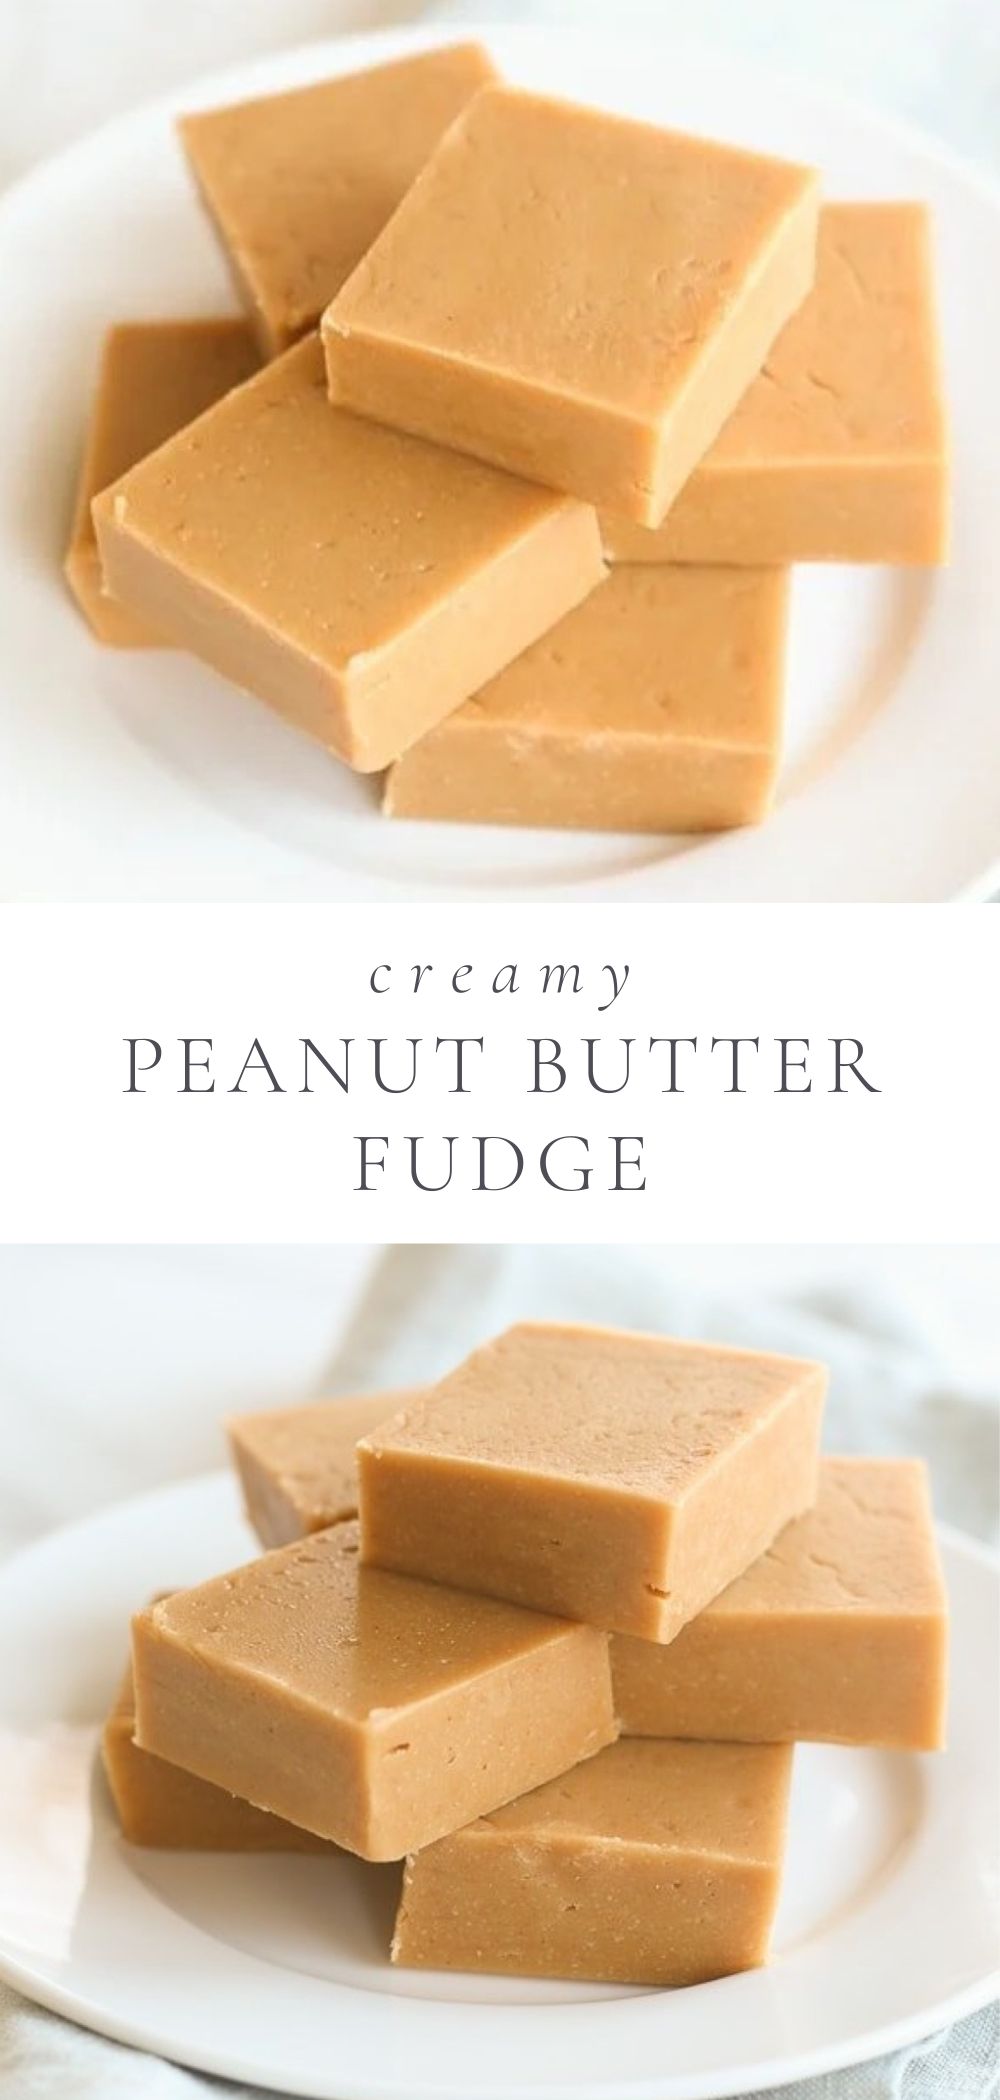 two pictures of peanut butter fudge on a plate